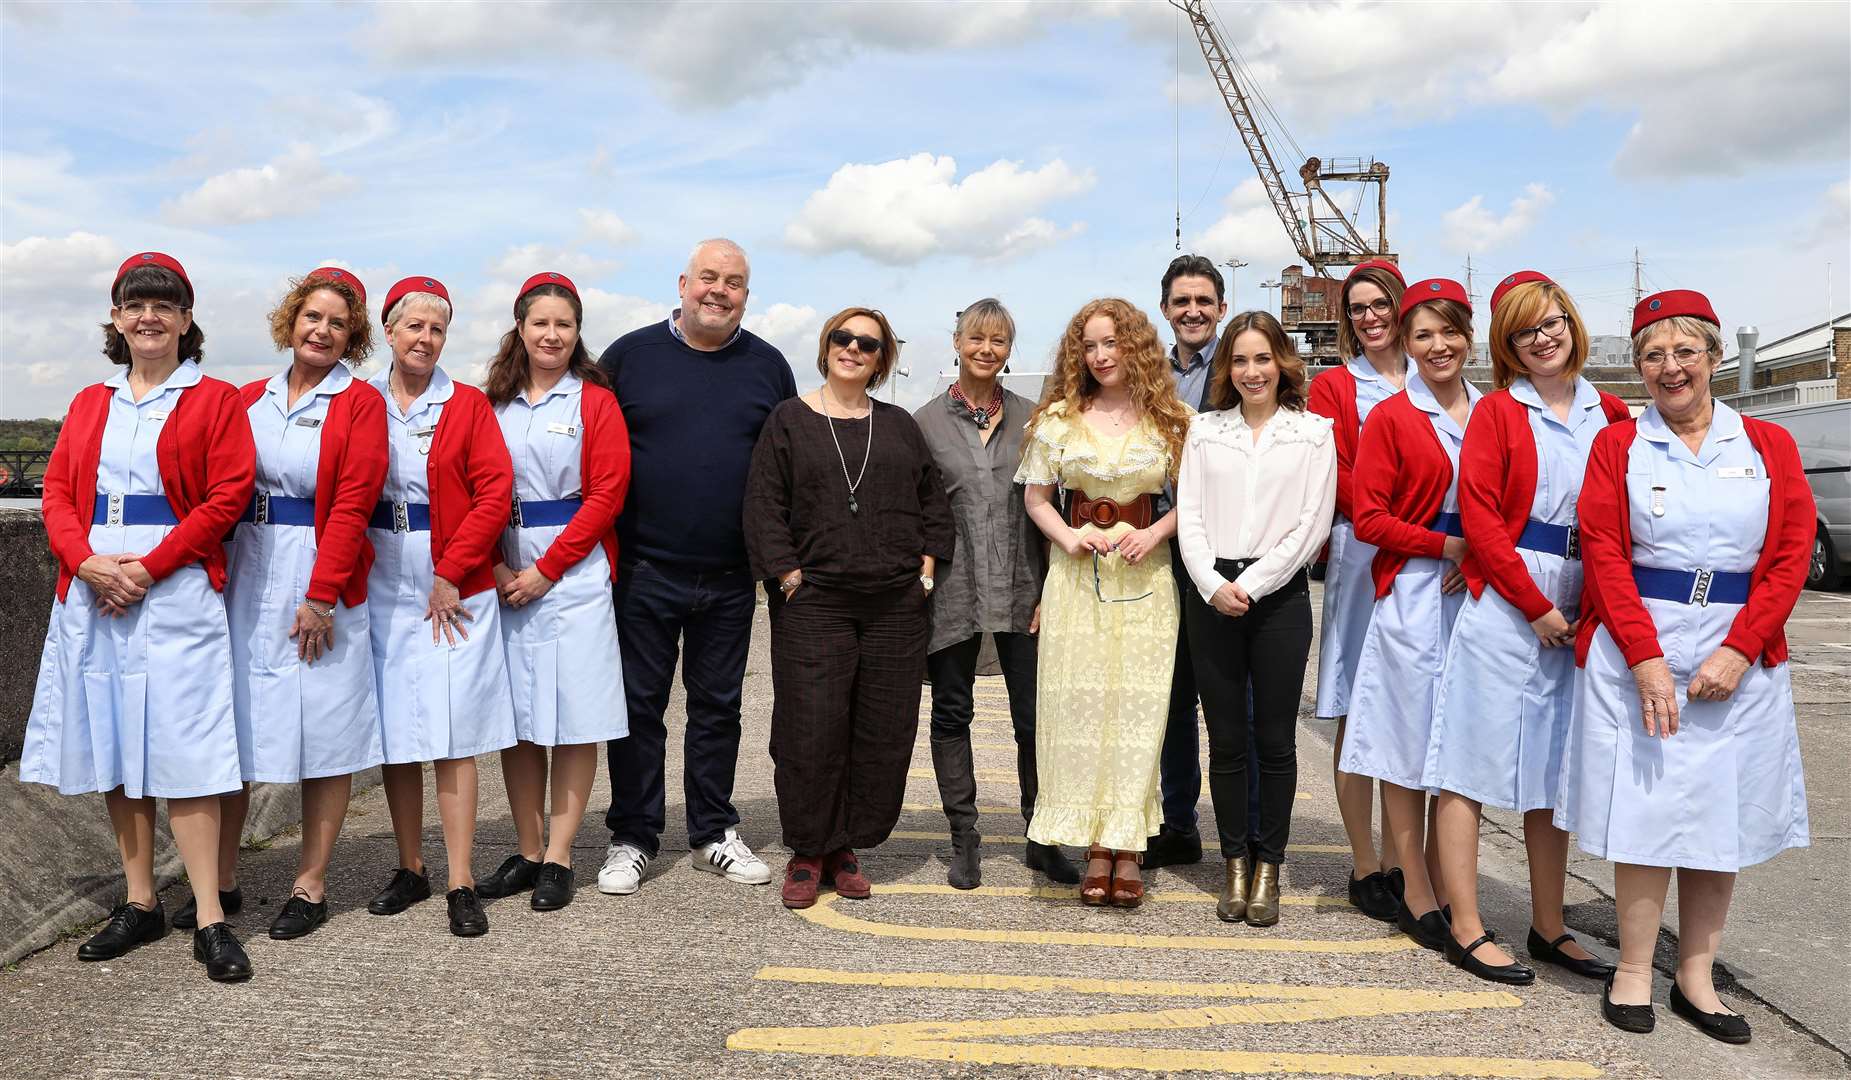 The Call the Midwife cast helped launch the series tours at Chatham Historic Dockyard